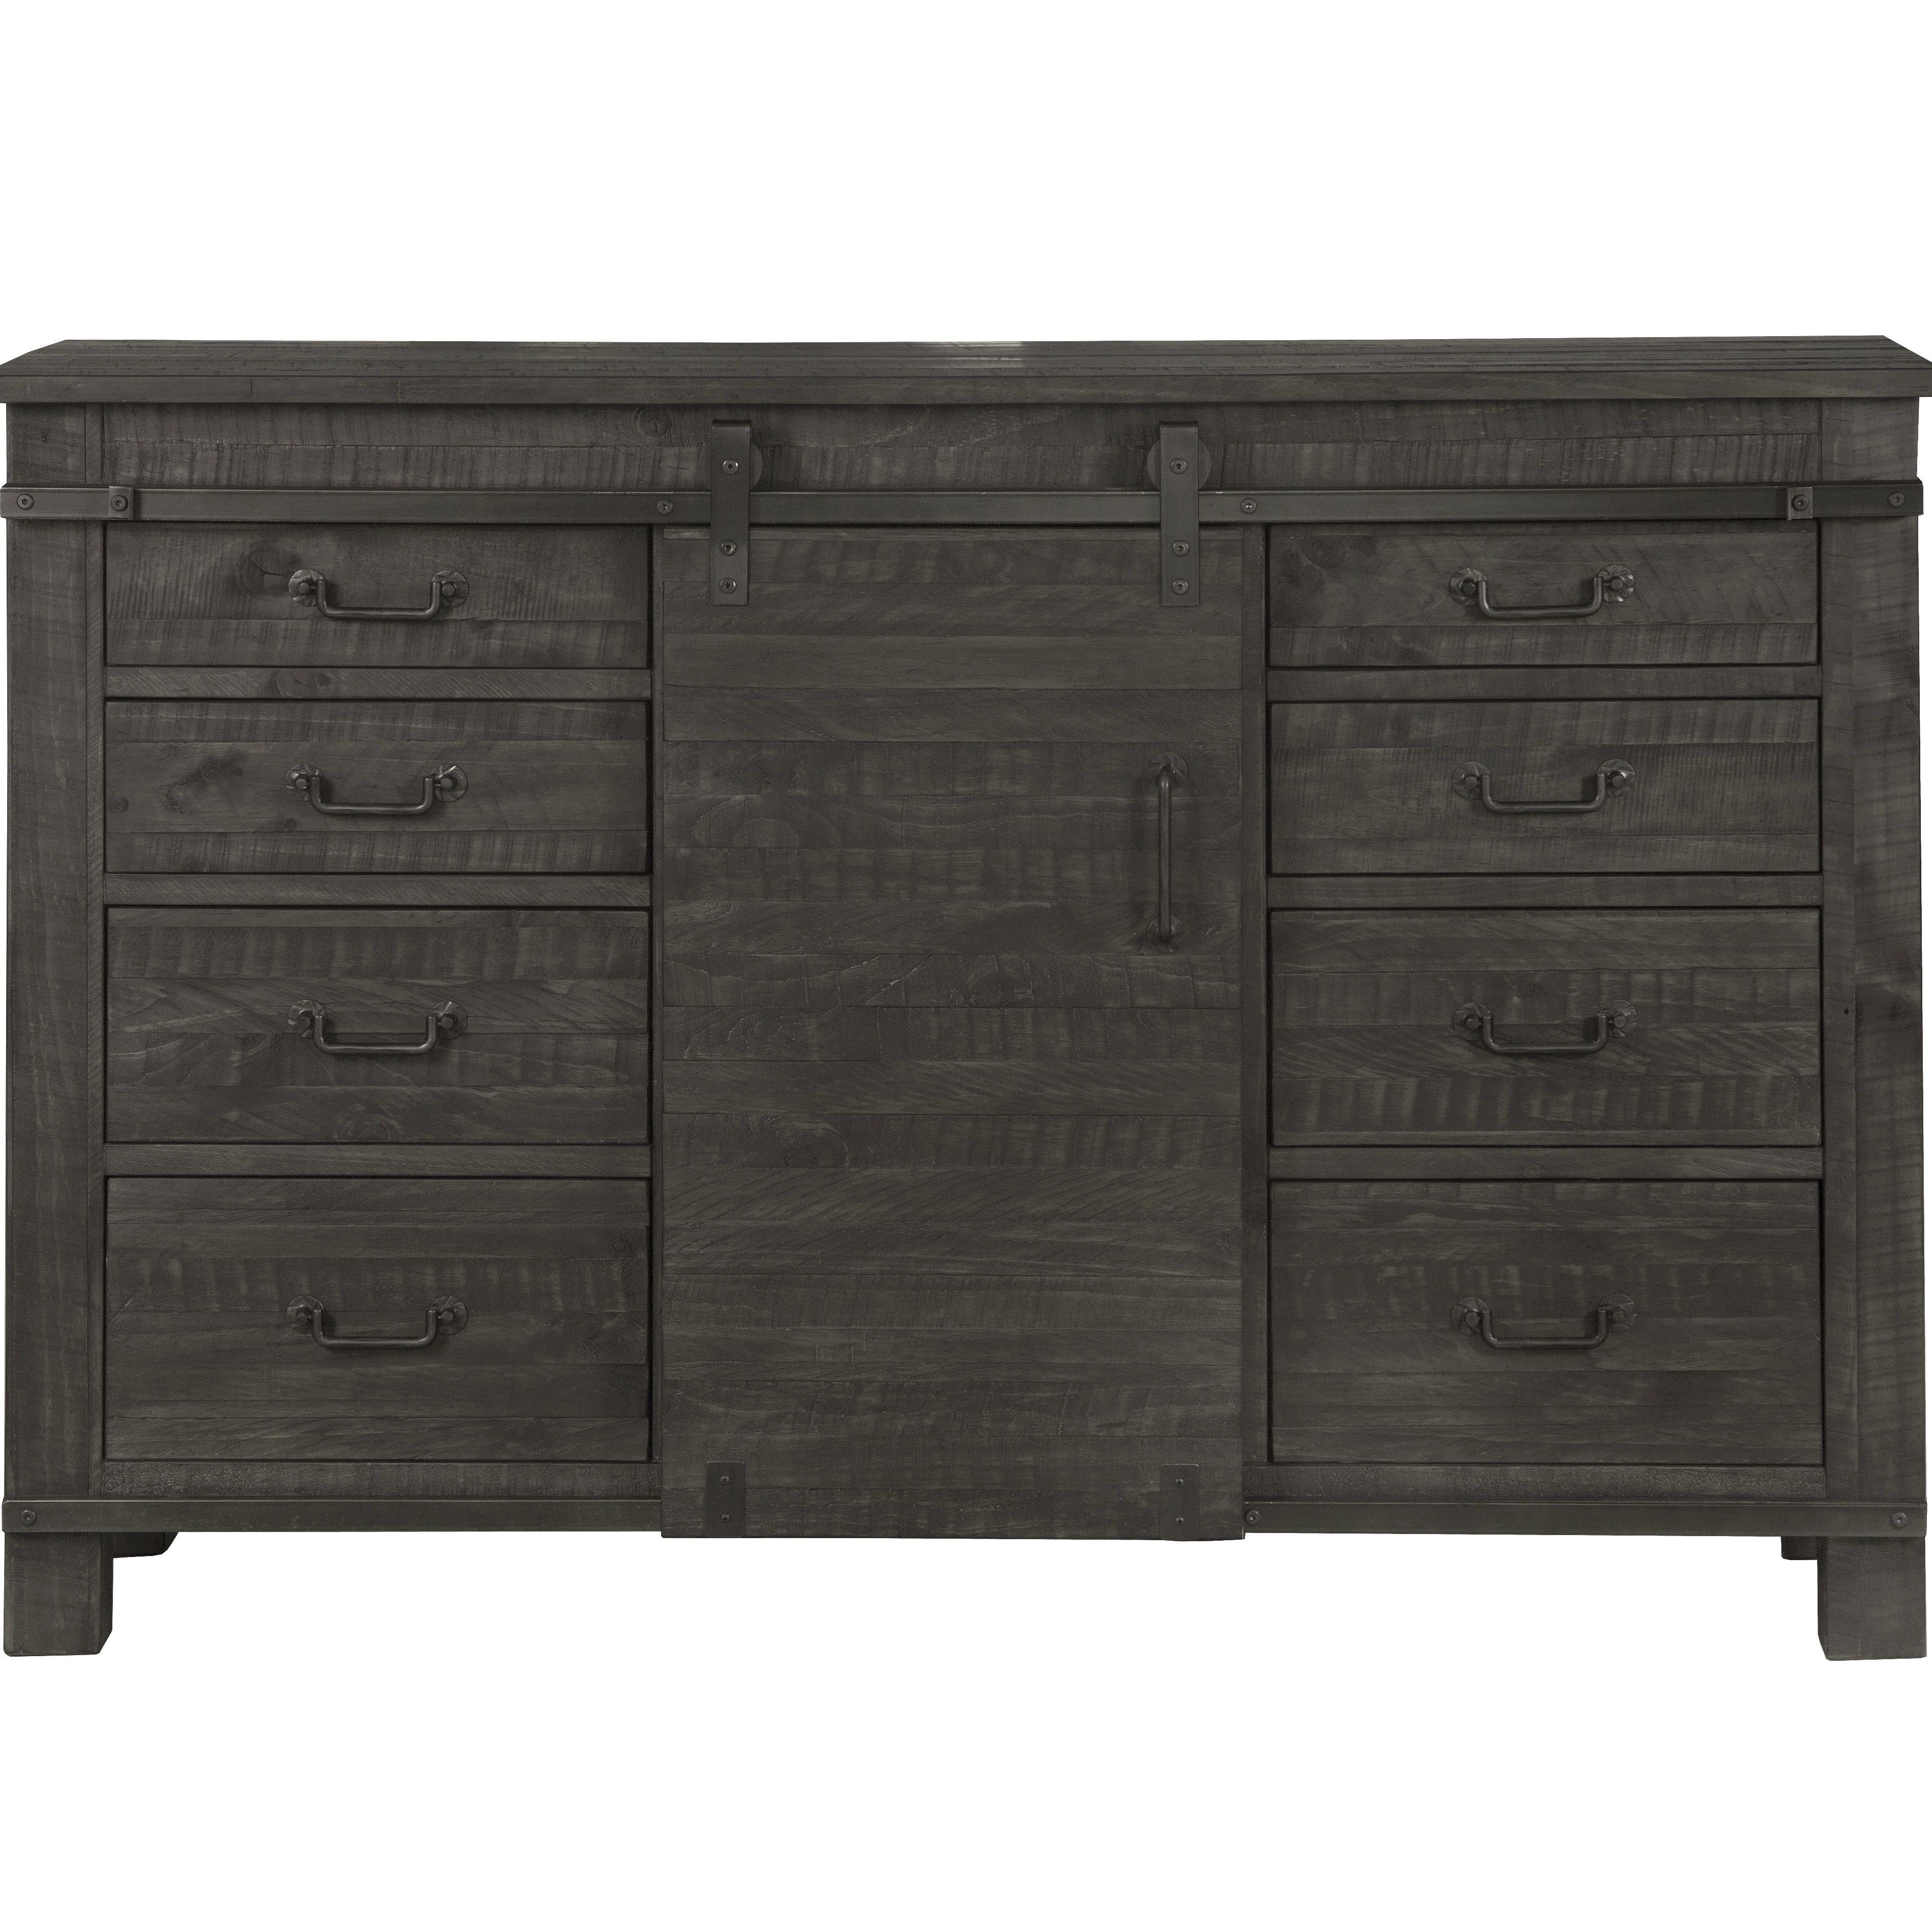 Carston Sideboard Within Best And Newest Drummond 4 Drawer Sideboards (View 15 of 20)